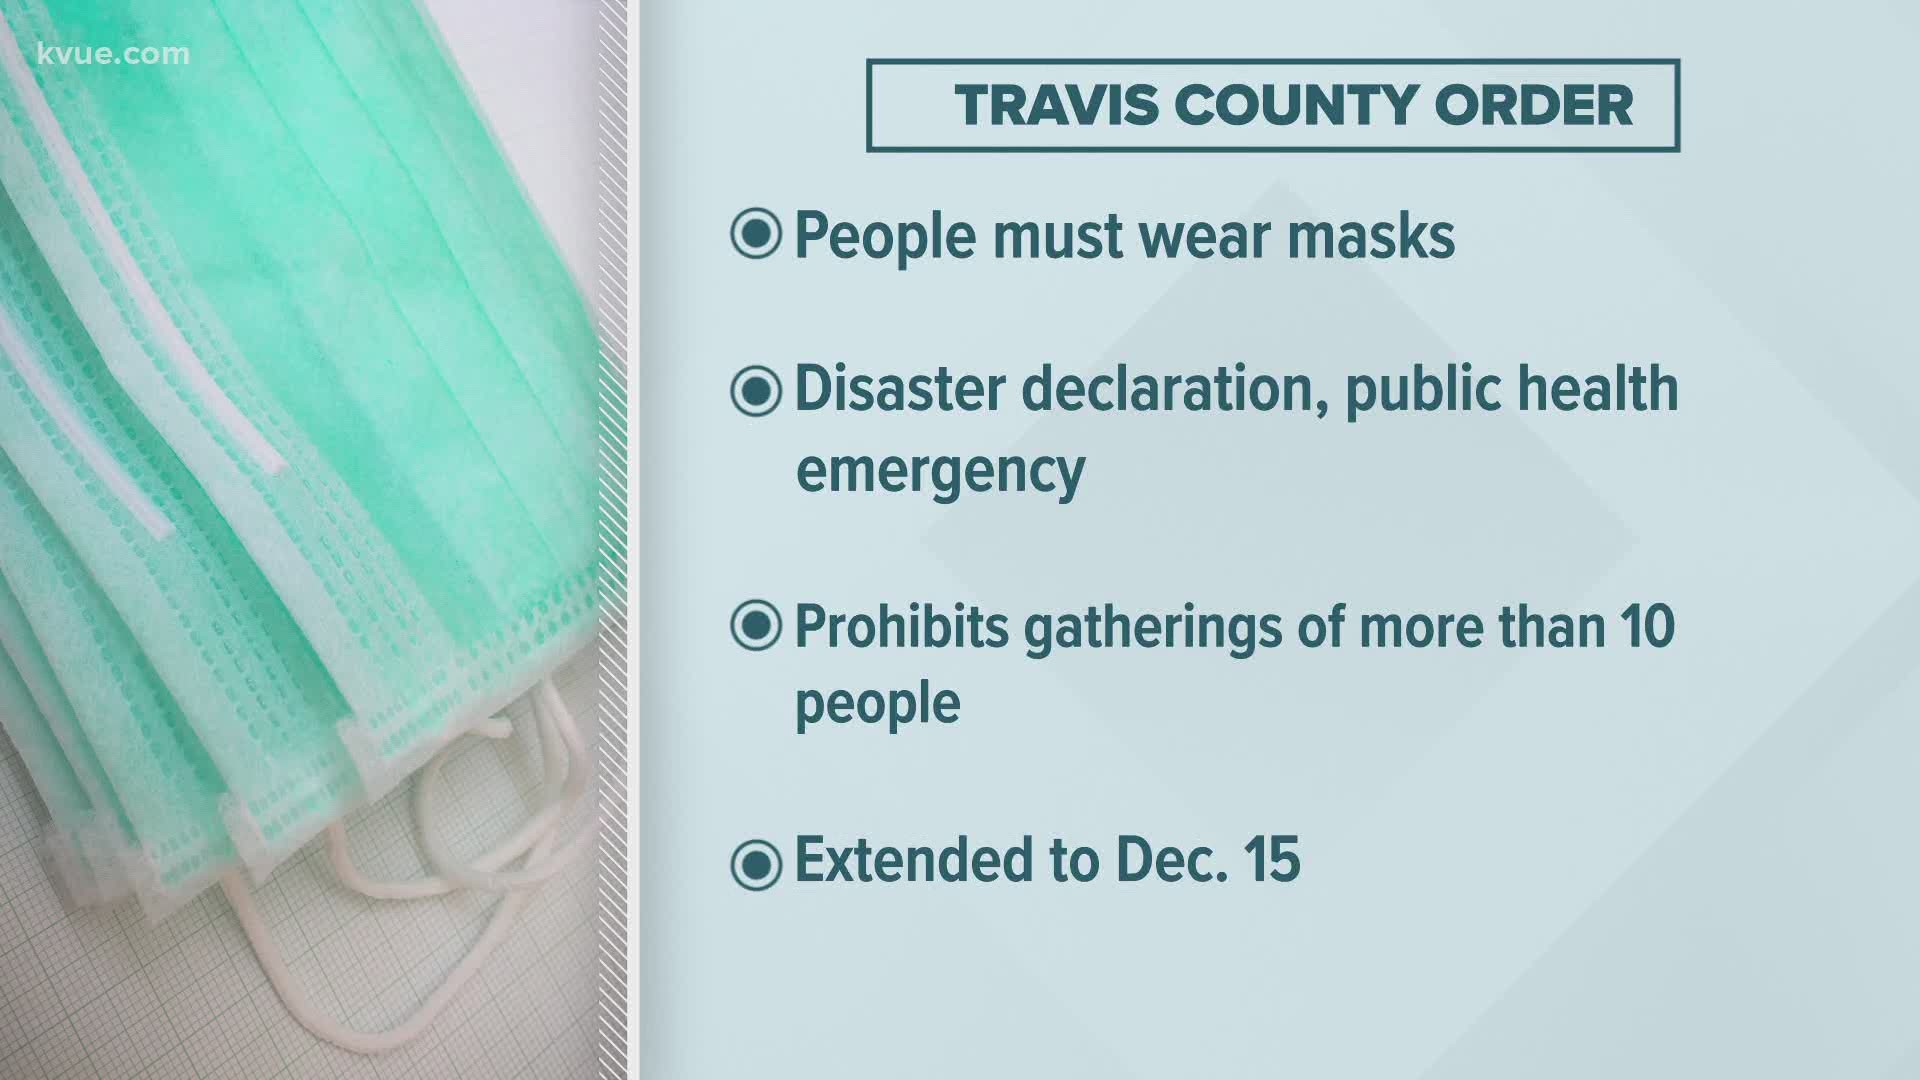 The Travis County order was extended until Dec. 15.